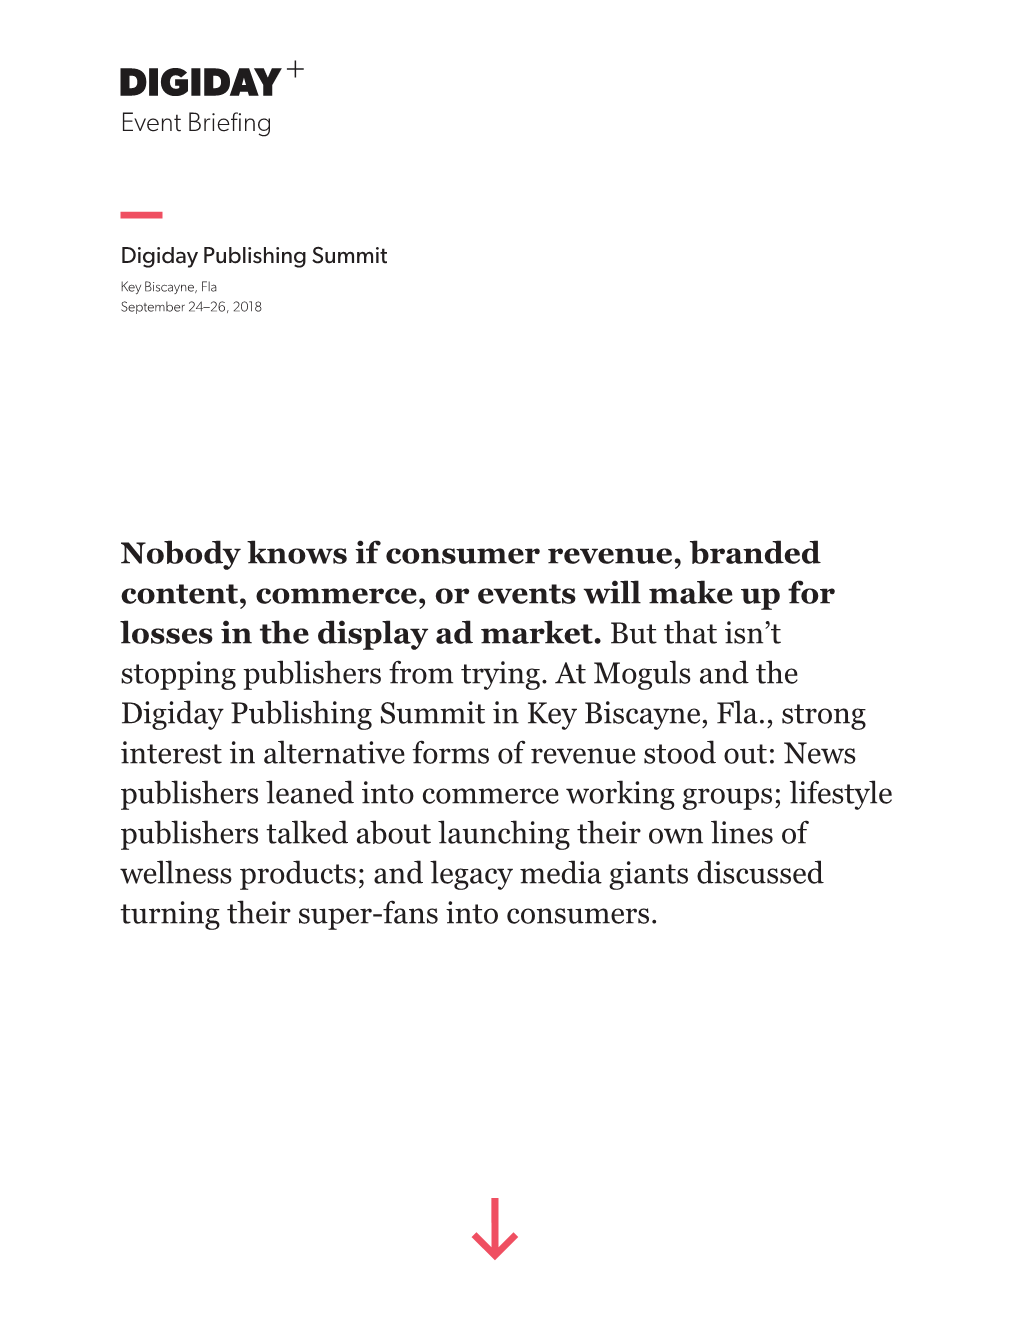 Nobody Knows If Consumer Revenue, Branded Content, Commerce, Or Events Will Make up for Losses in the Display Ad Market